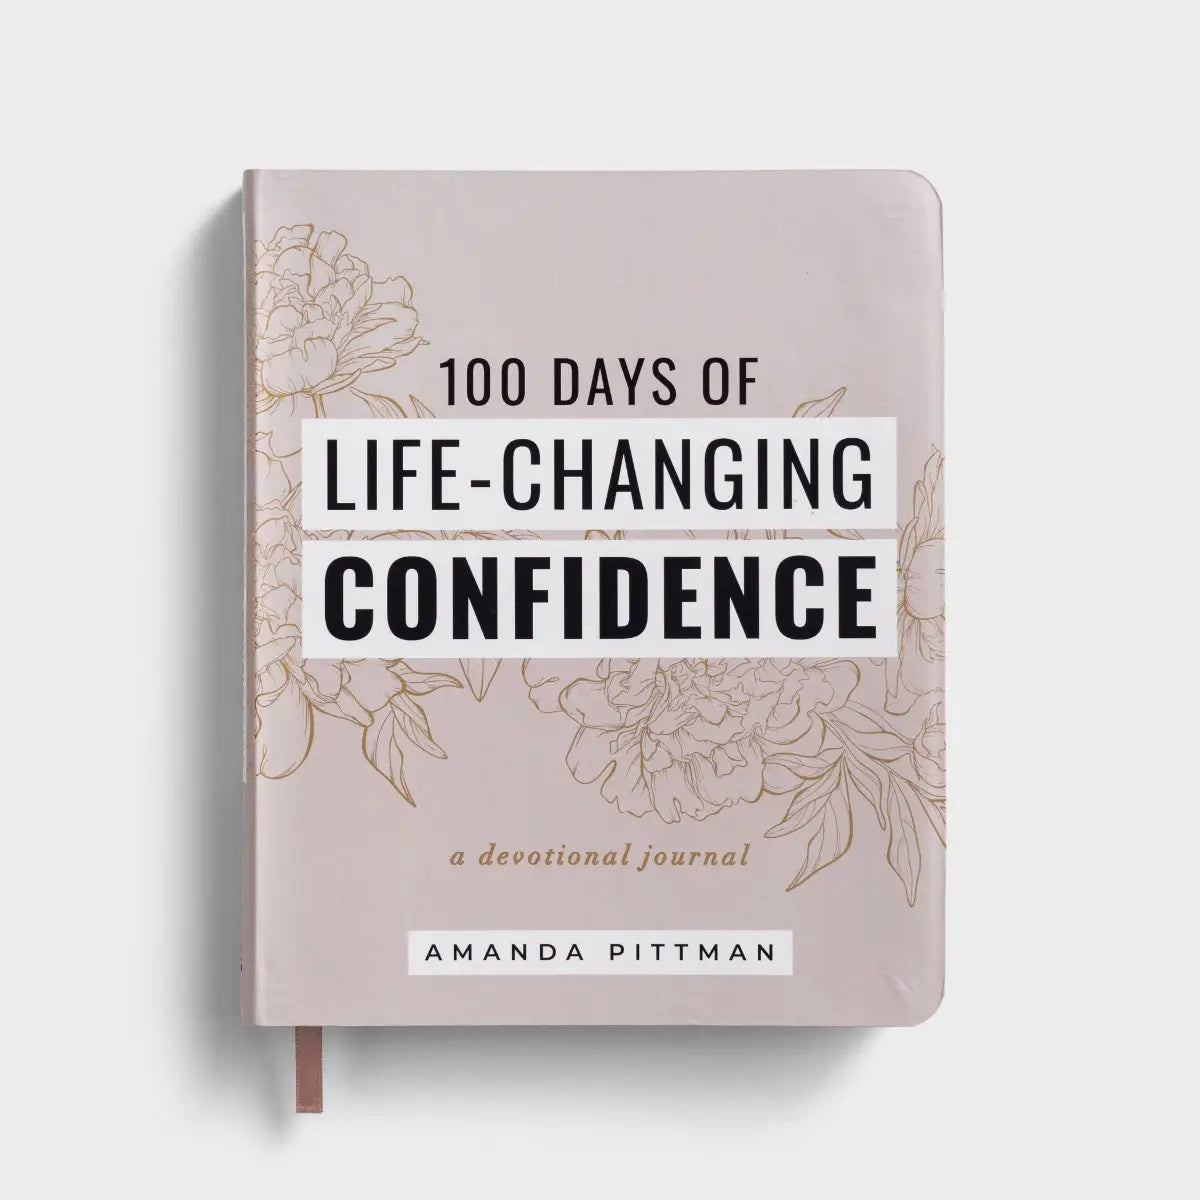 100 Days of Life-Changing Confidence - A Devotional Journal